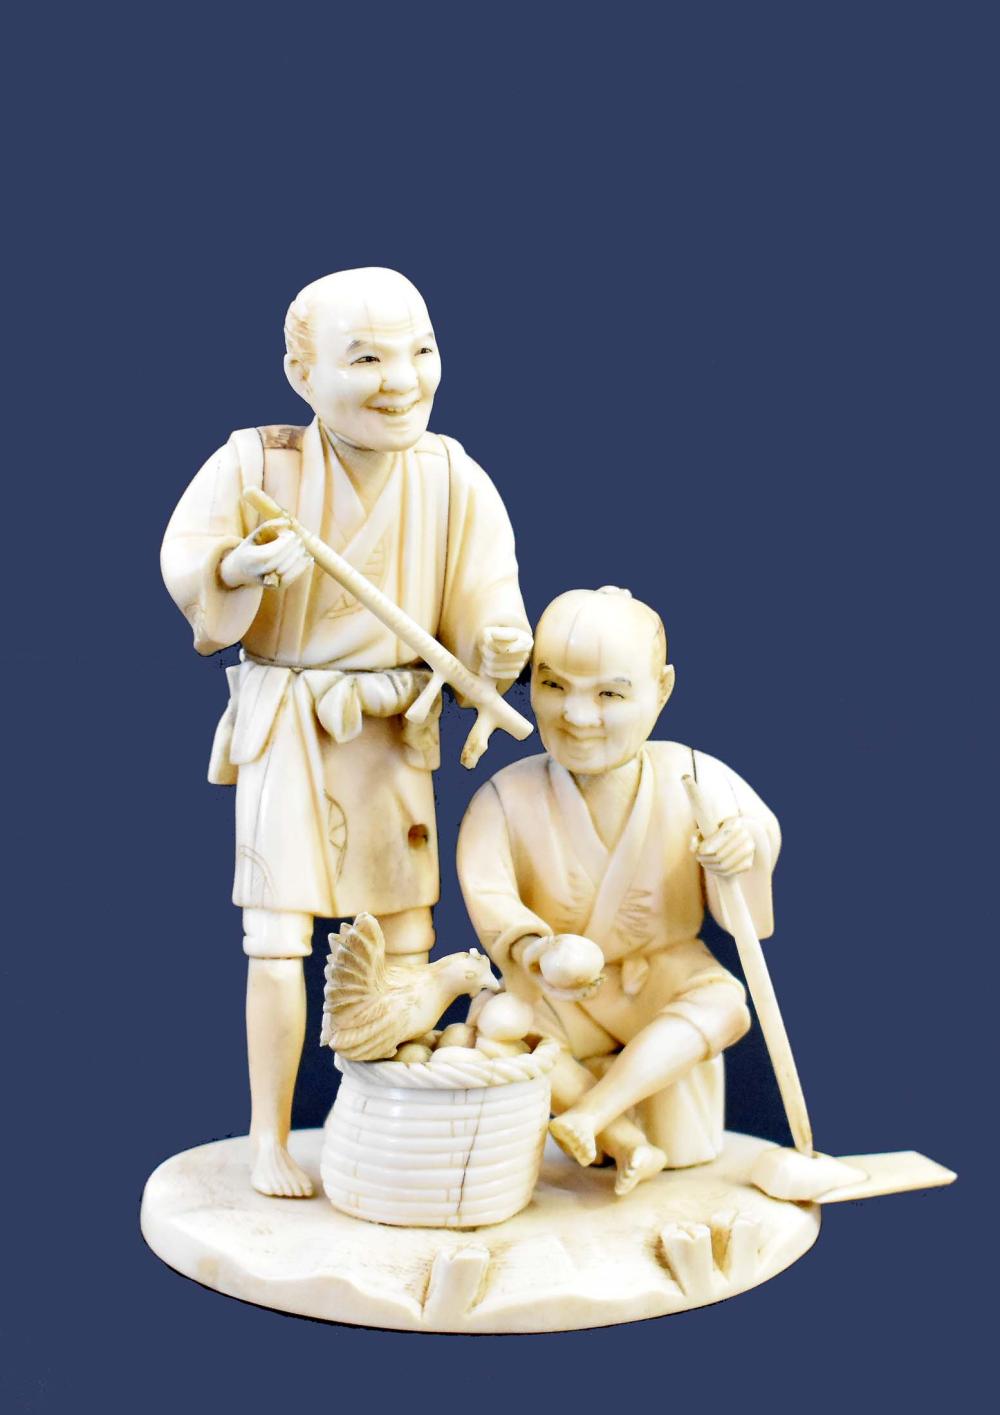 JAPANESE CARVED OKIMONO OF A FARMERAppears